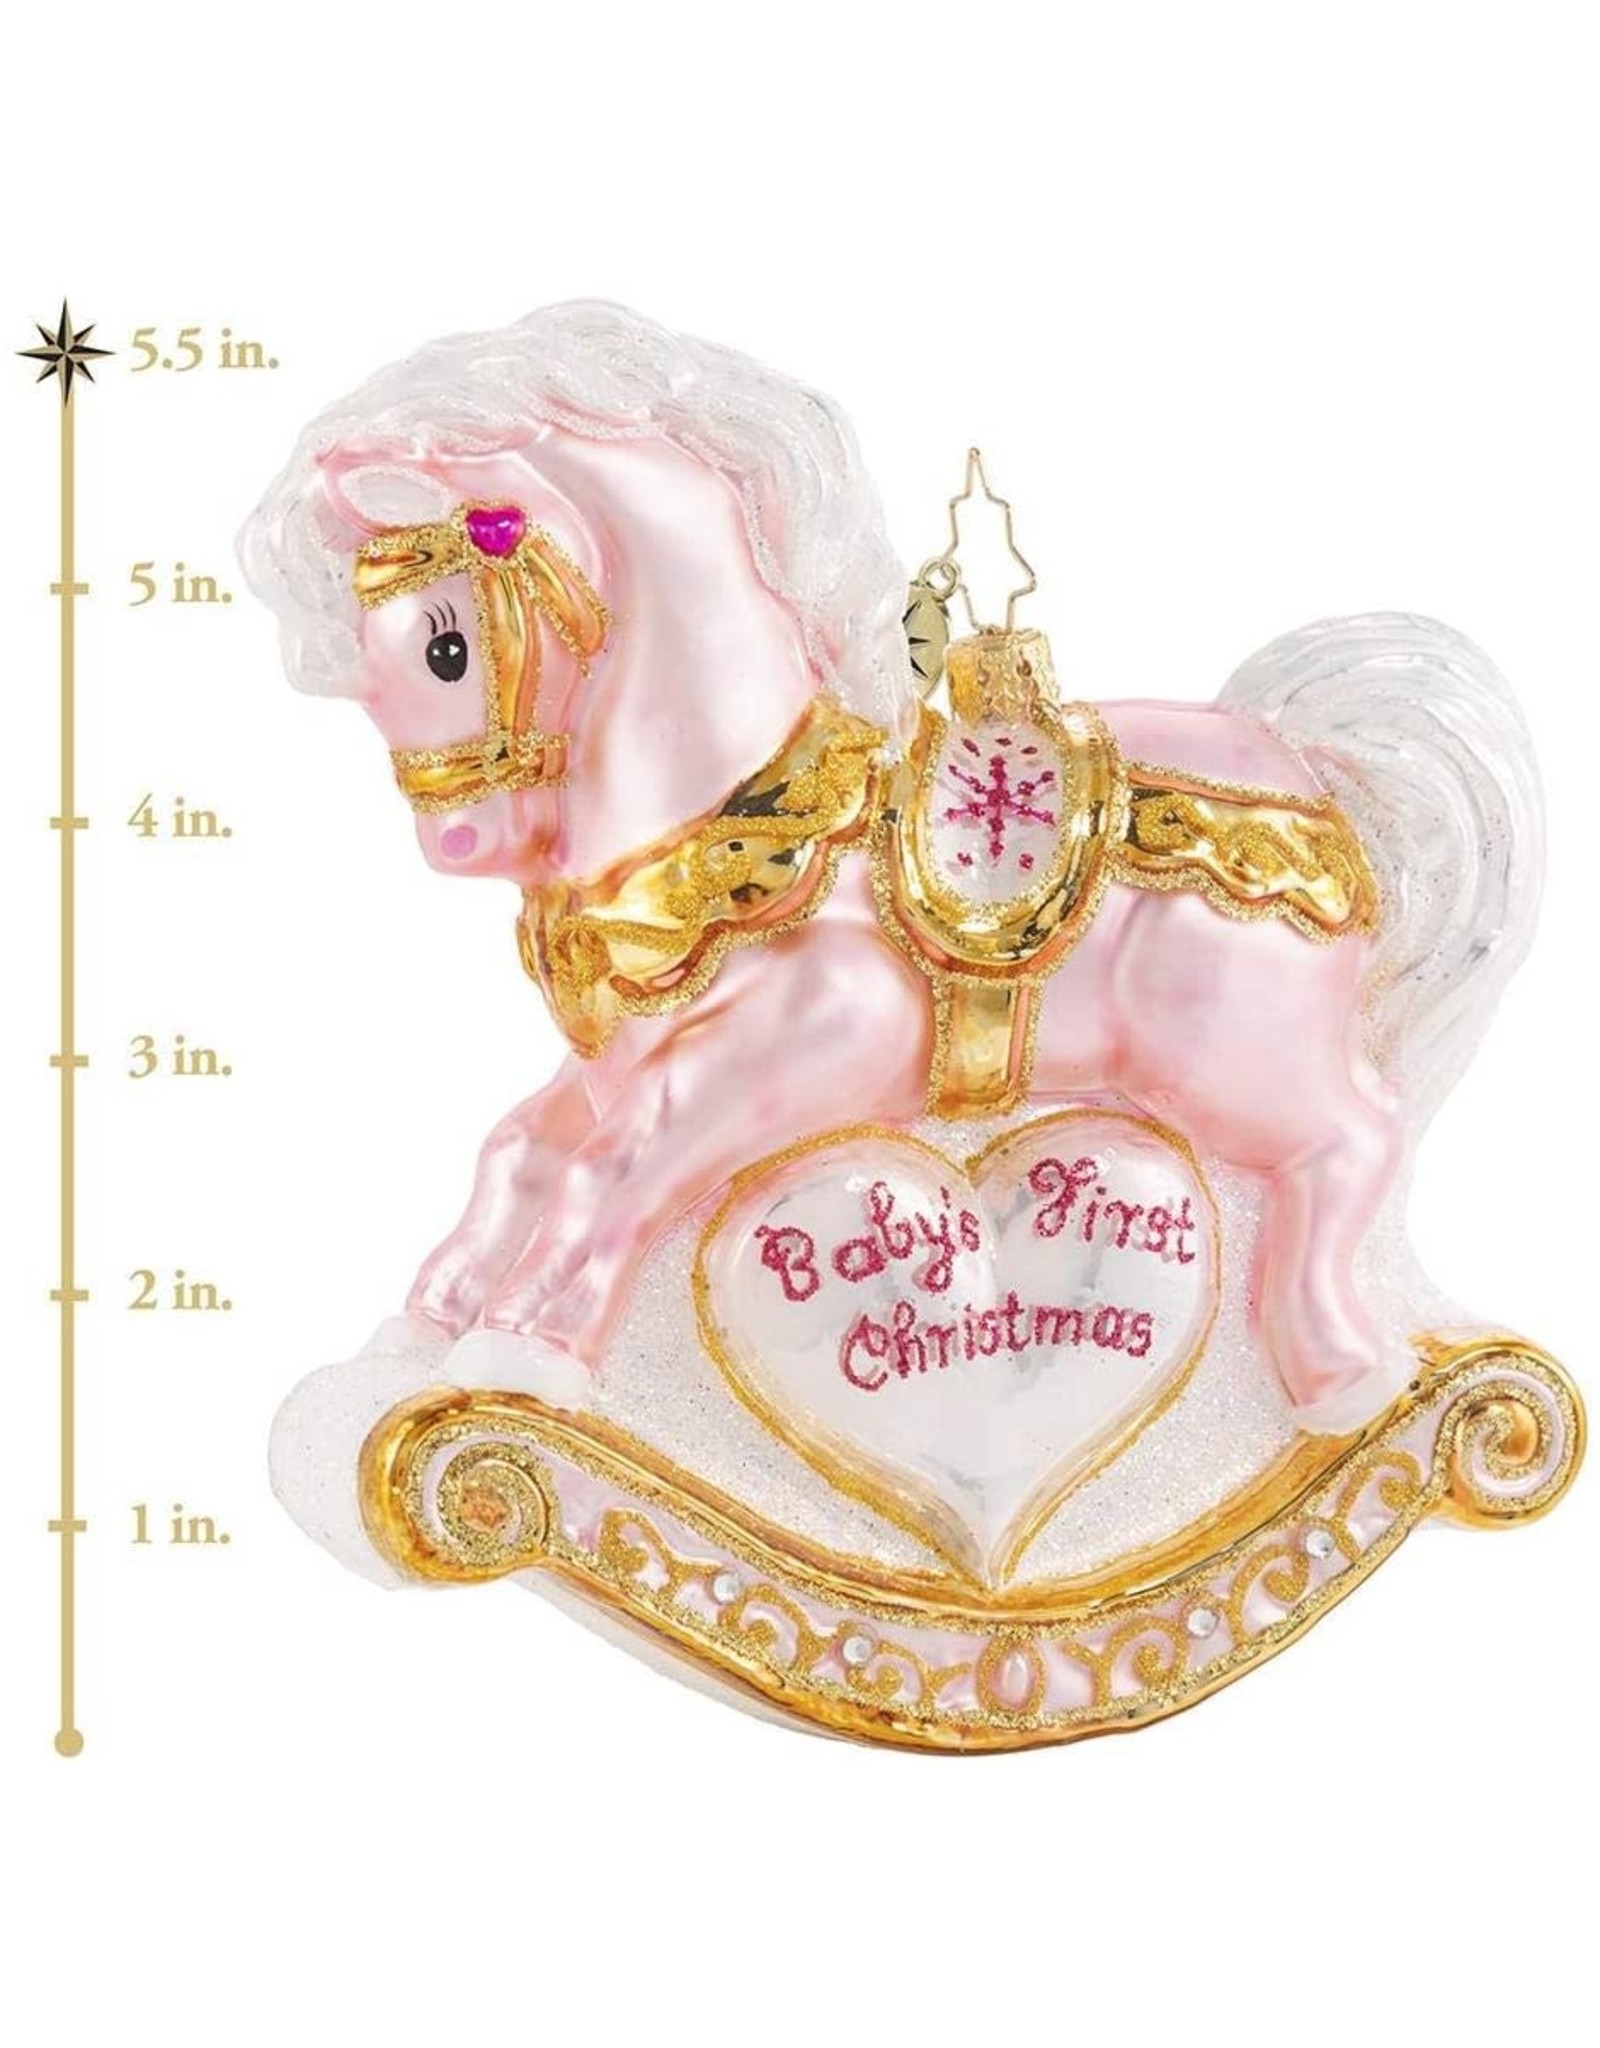 Christopher Radko Baby's First Christmas Filly Pink Pony Rocking Horse Ornament 5 inch